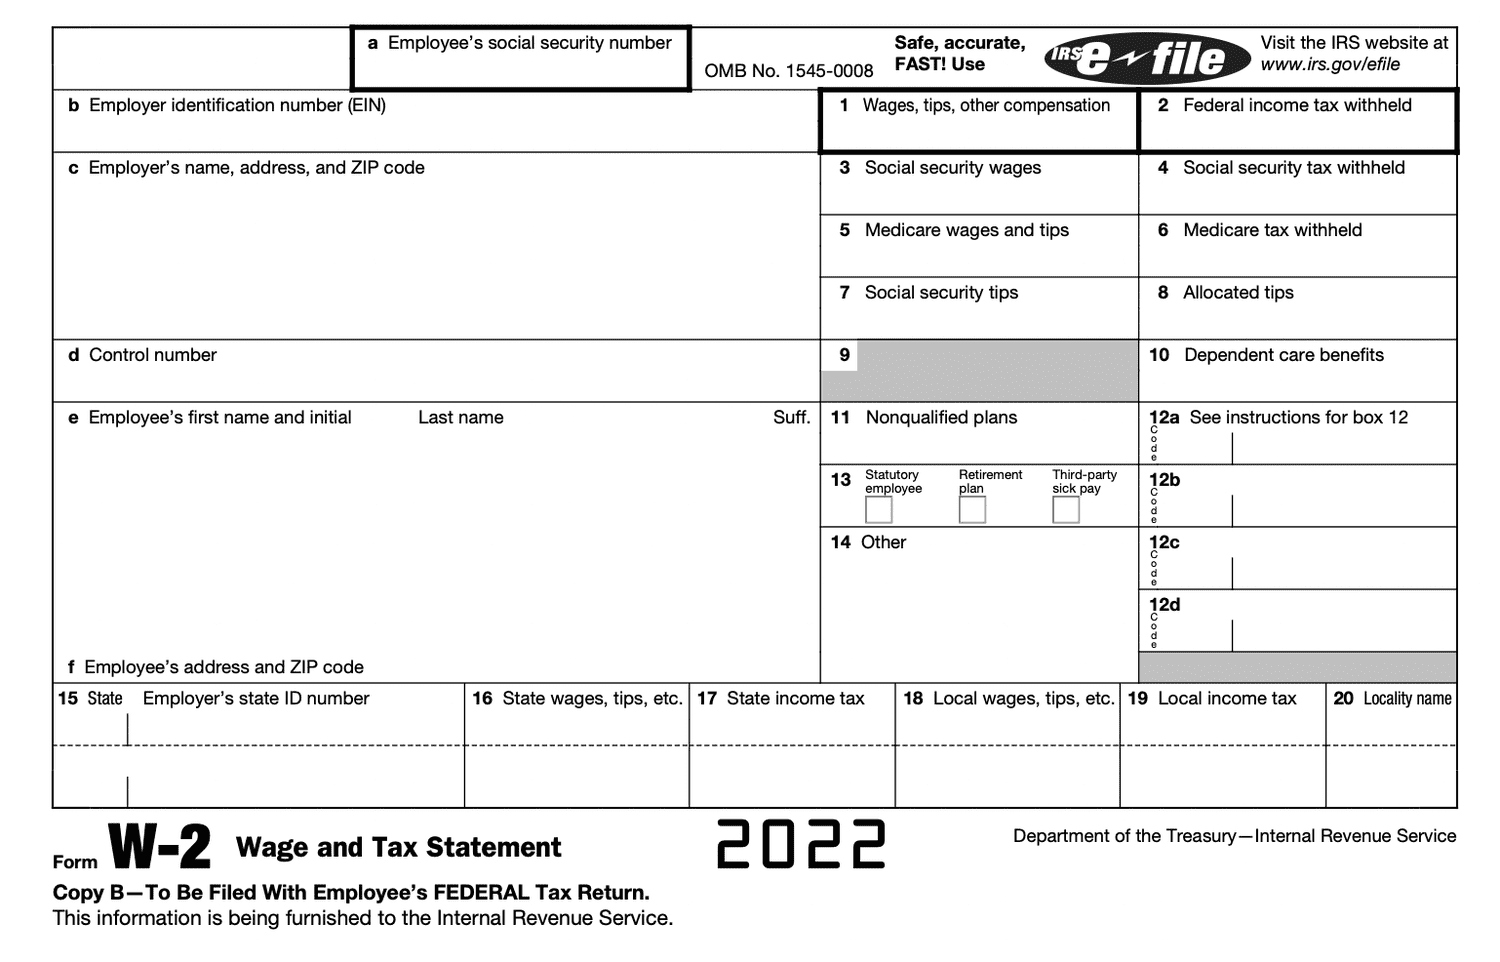 Form W-2 Wage And Tax Statement: What It Is And How To Read It regarding Can A W2 Be Used As A Form Of Id